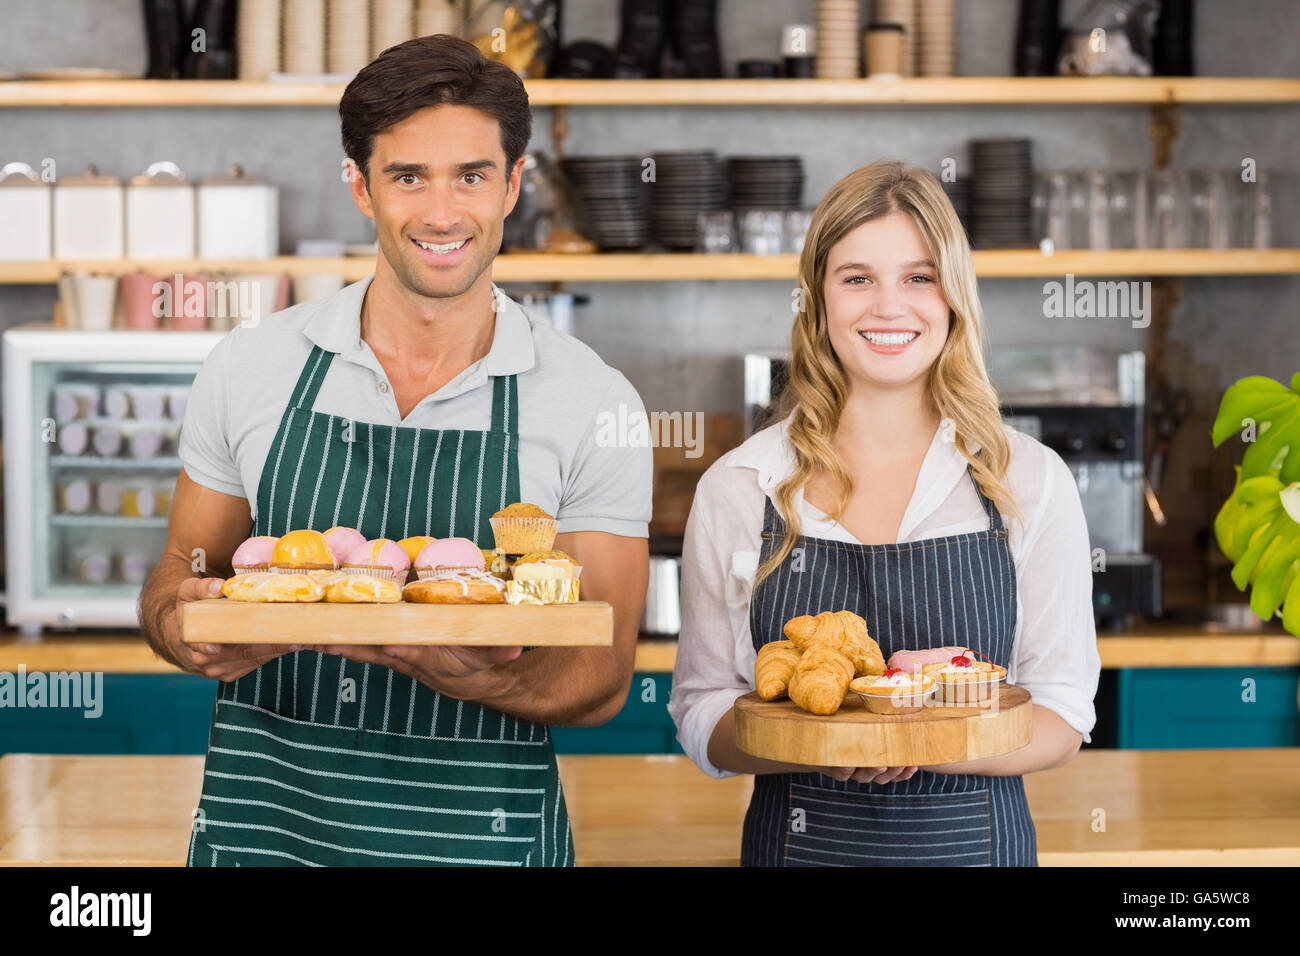 Portrait of waiter and waitress holding a tray of cupcakes Stock Photo